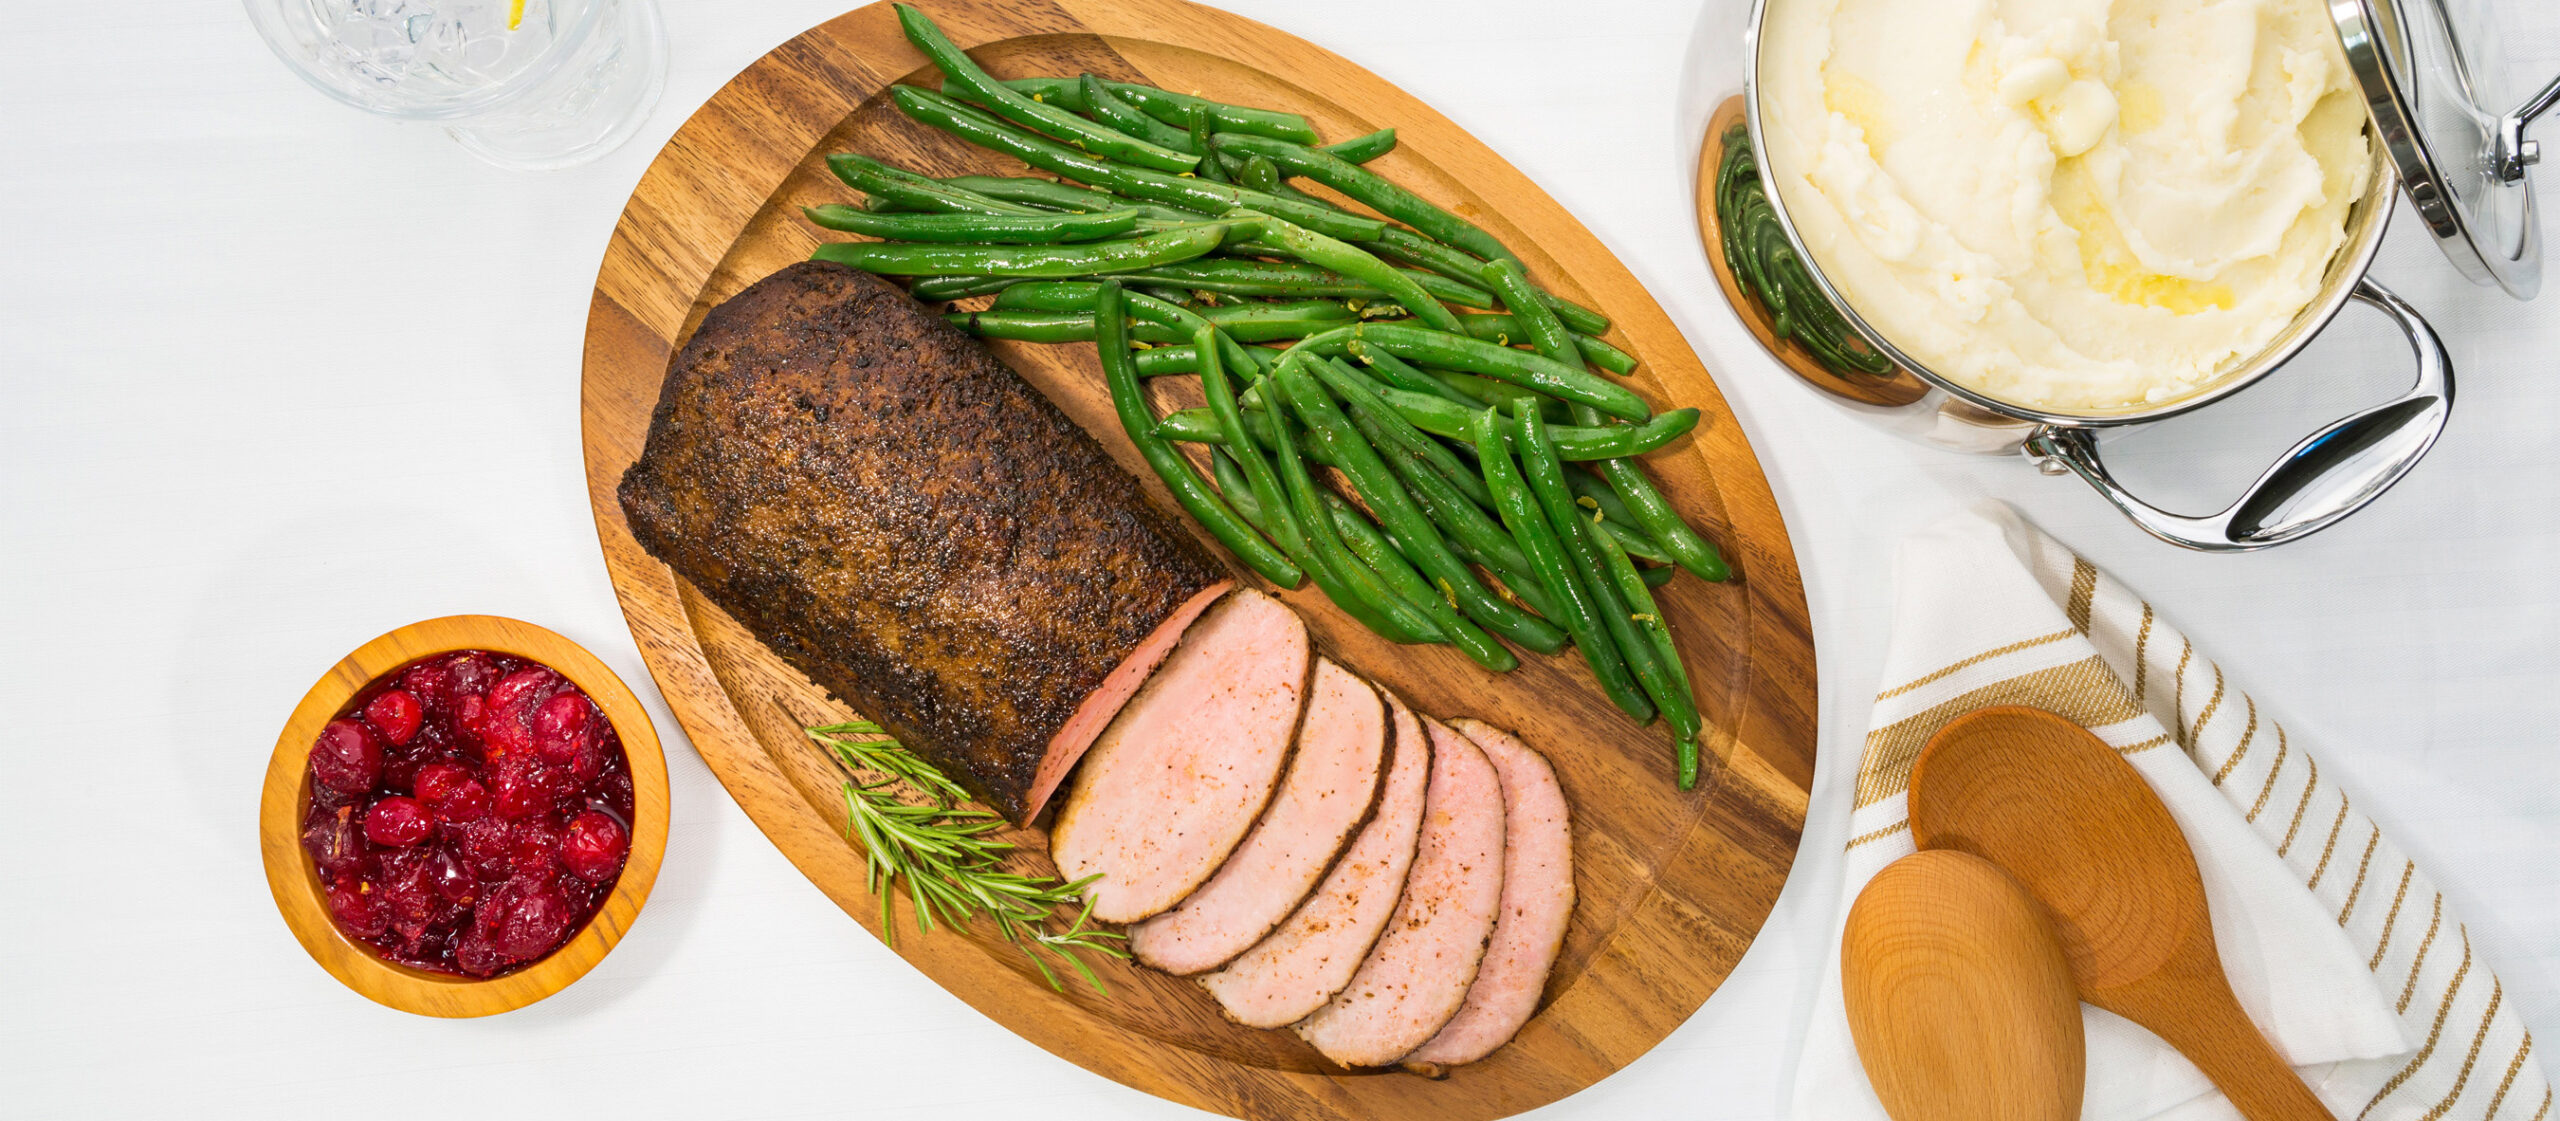 Overhead shot of an elegant holiday dinner of pork loin roast paired with cranberries, green beans, and mashed potatoes